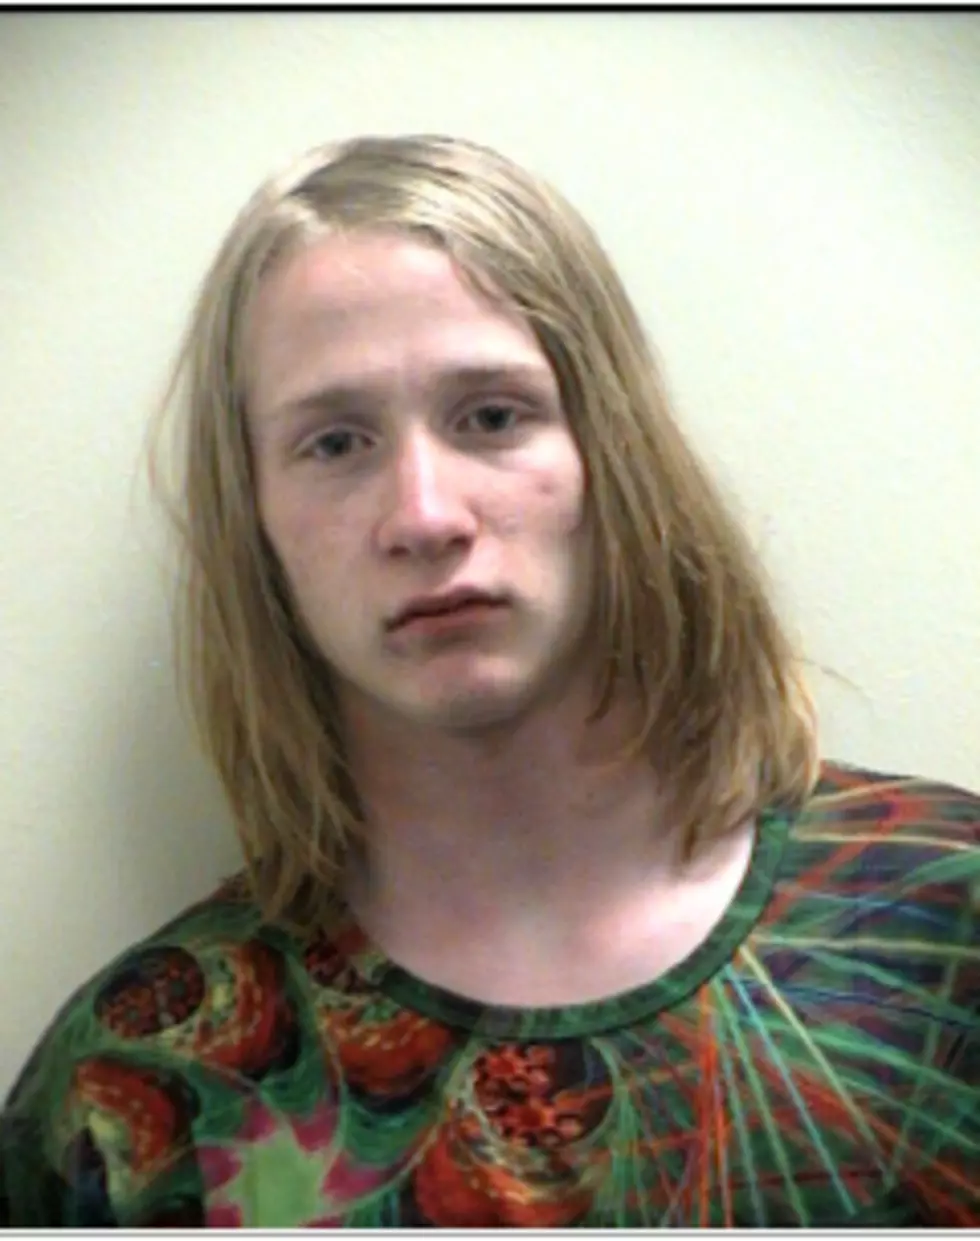 ARRESTED: Hitchhiking Teen Wanted for Attempted Murder in Northern Colorado